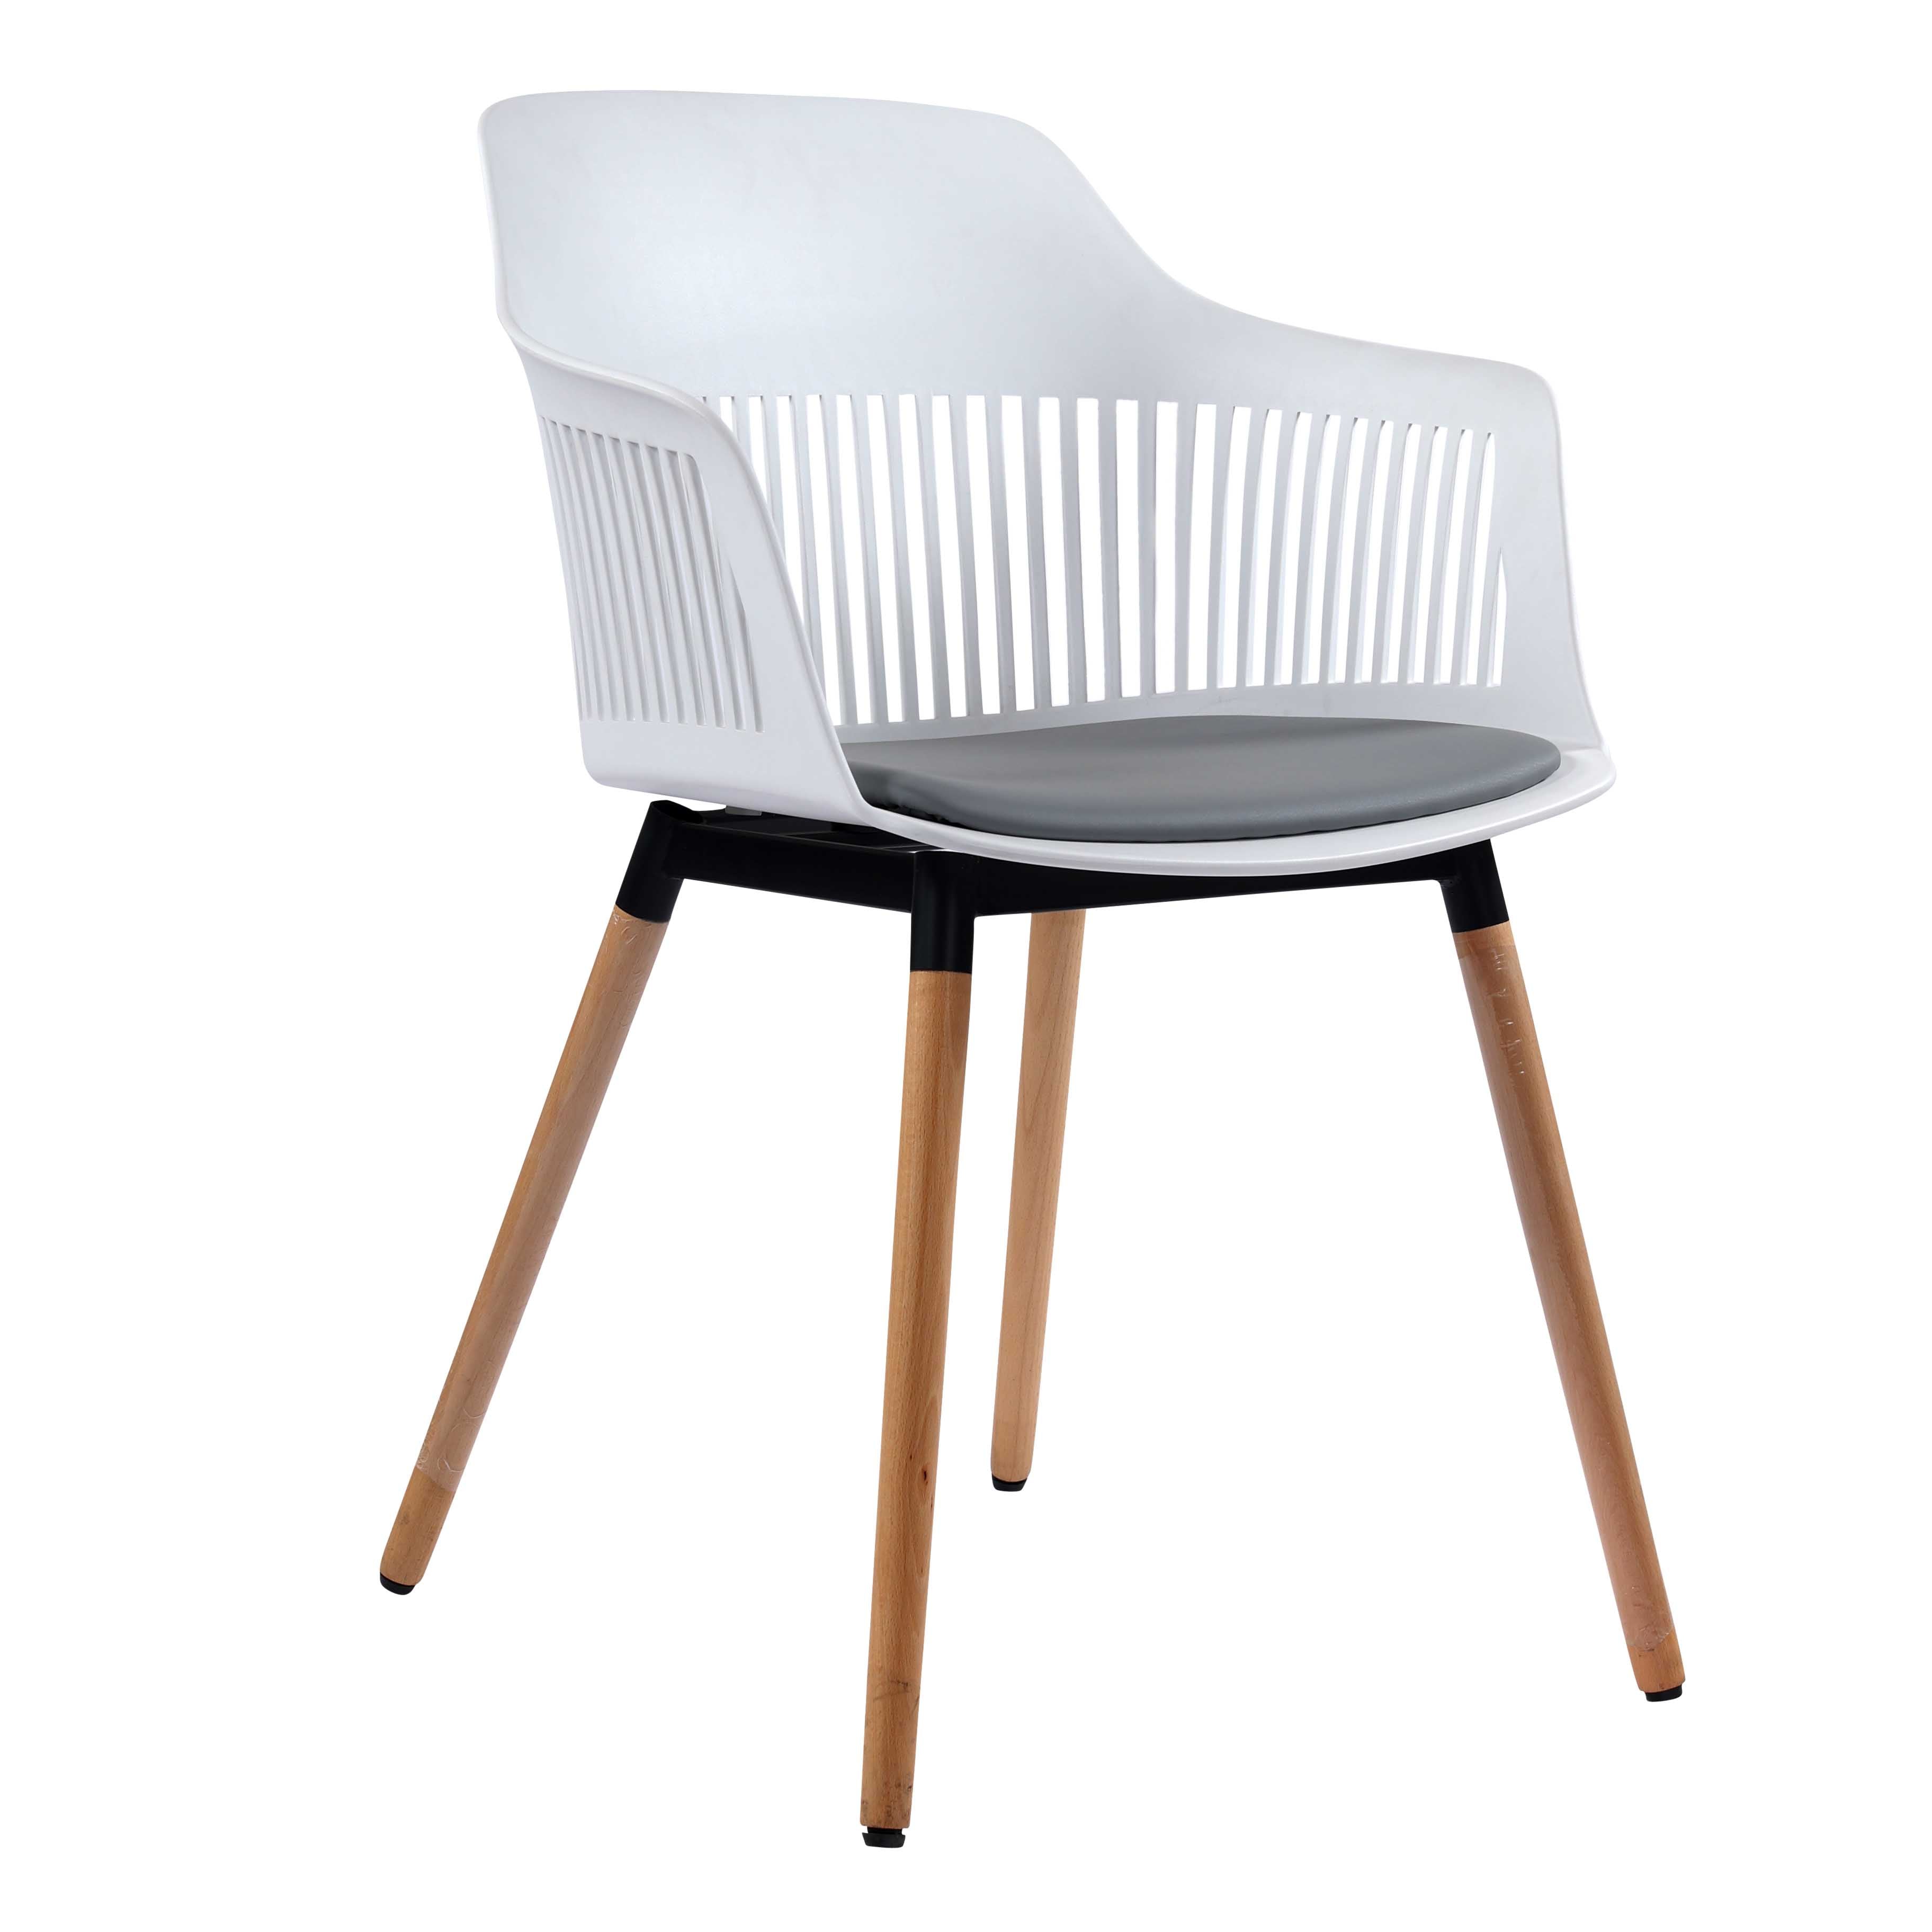 Norah Mid Century Molded Plastic Shell Arm Hollow Out Chair with Wooden Legs - White Chair urbancart